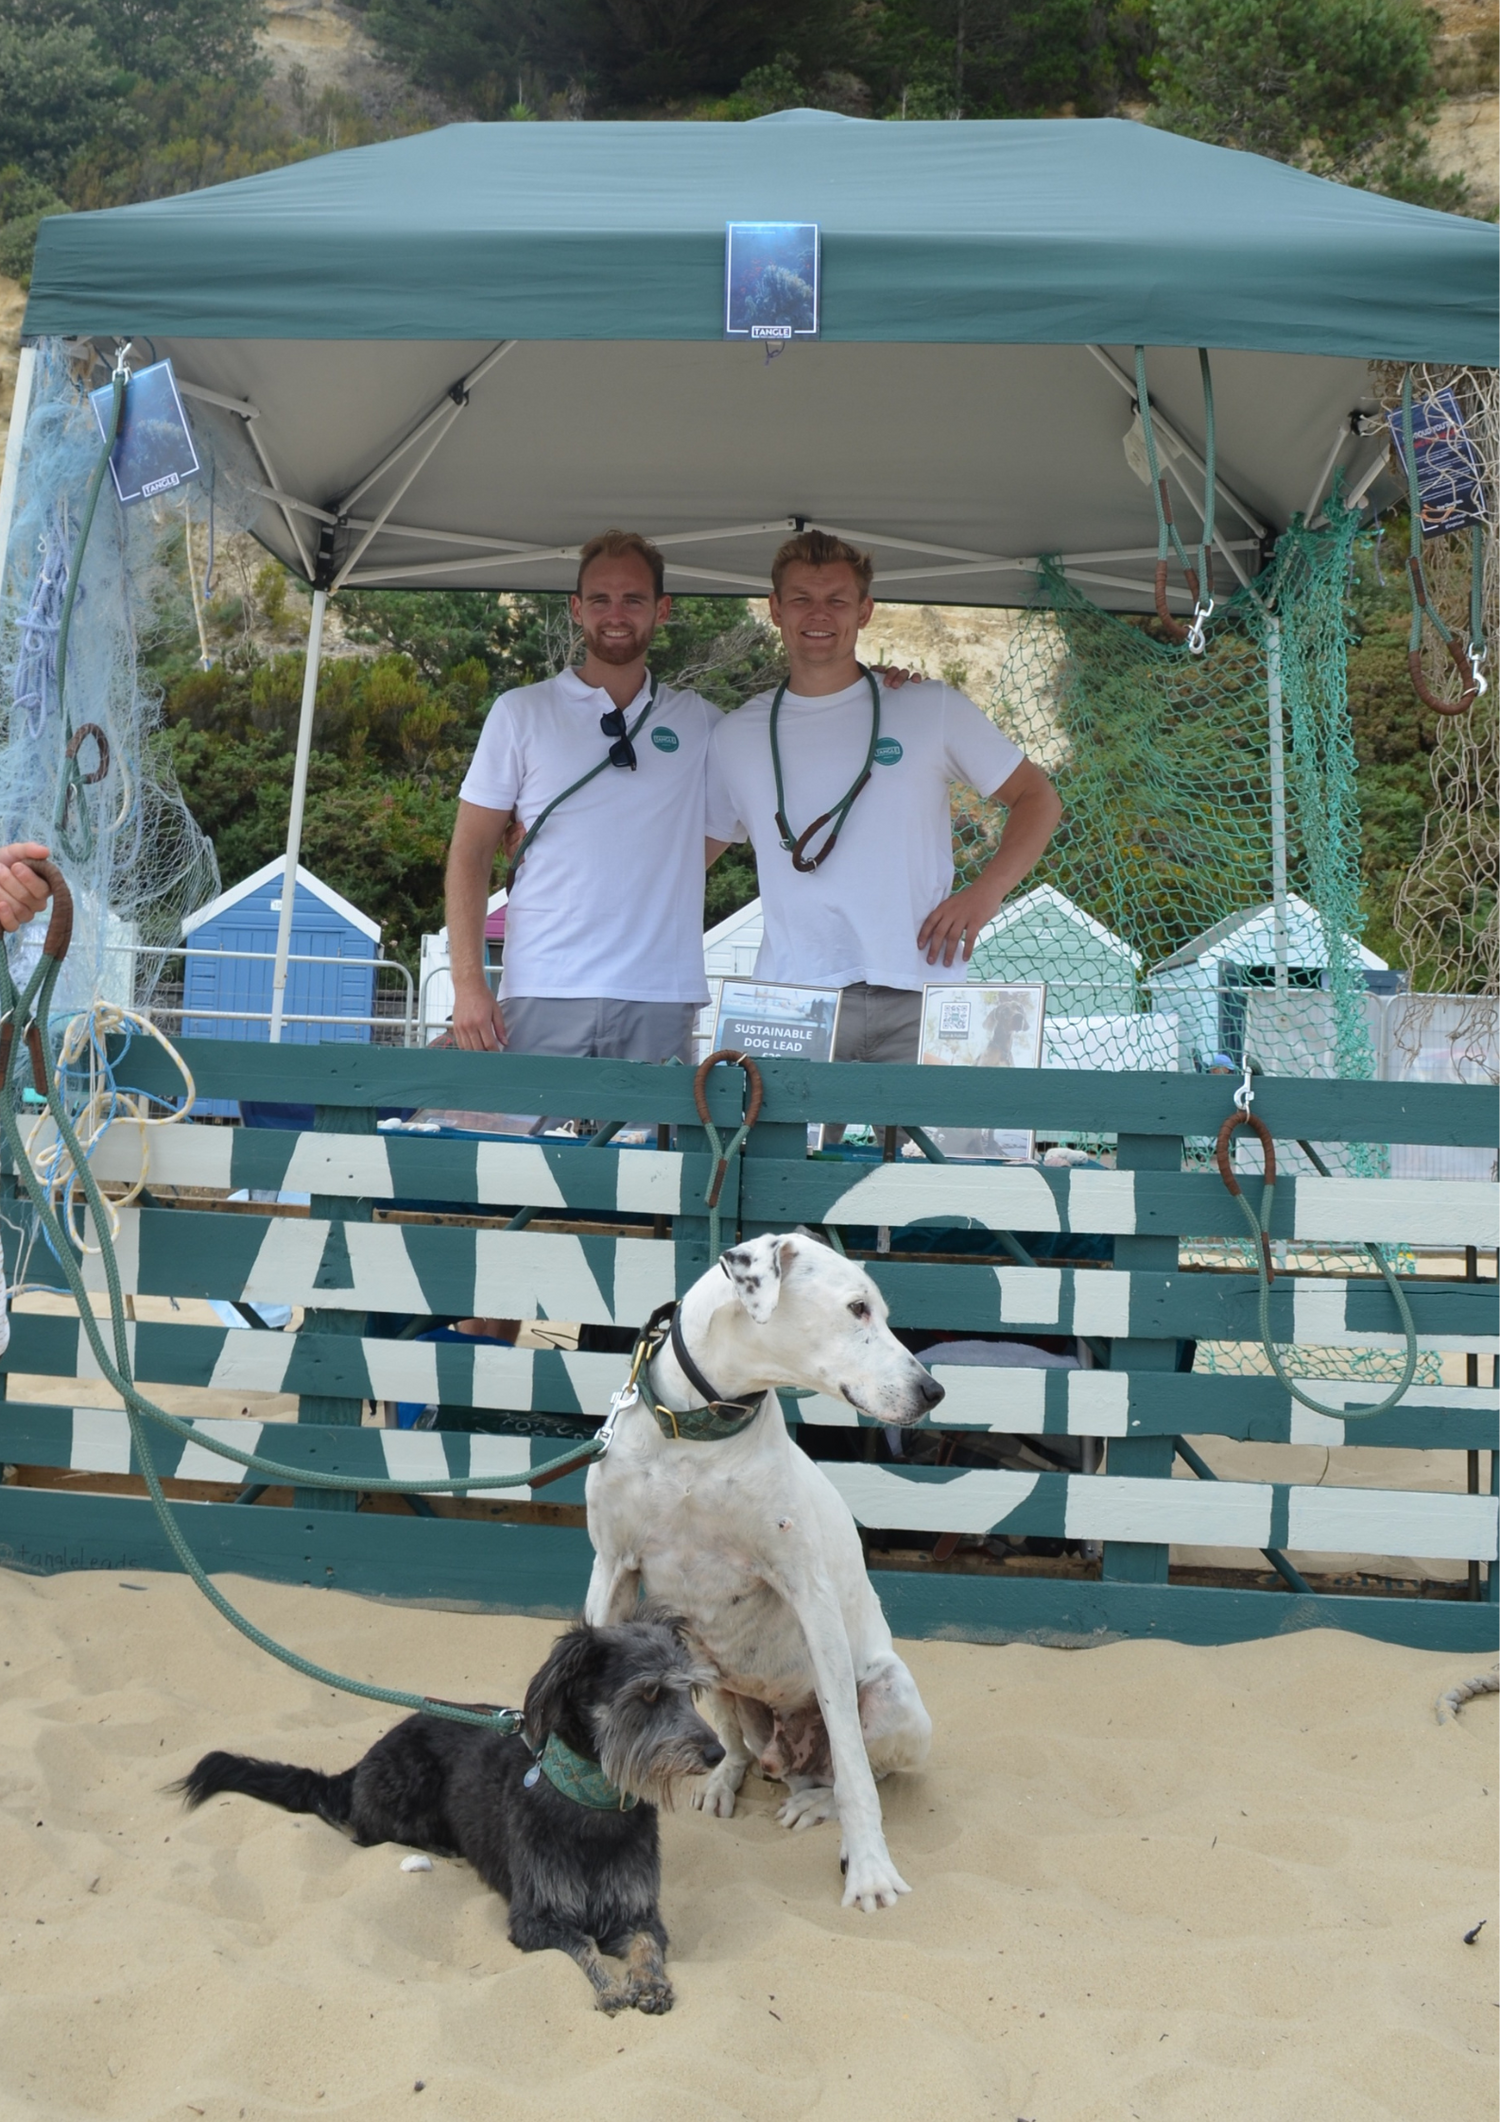 Photo of Sam and Xavier on the beach with two dogs and a sign of the Tangle company name